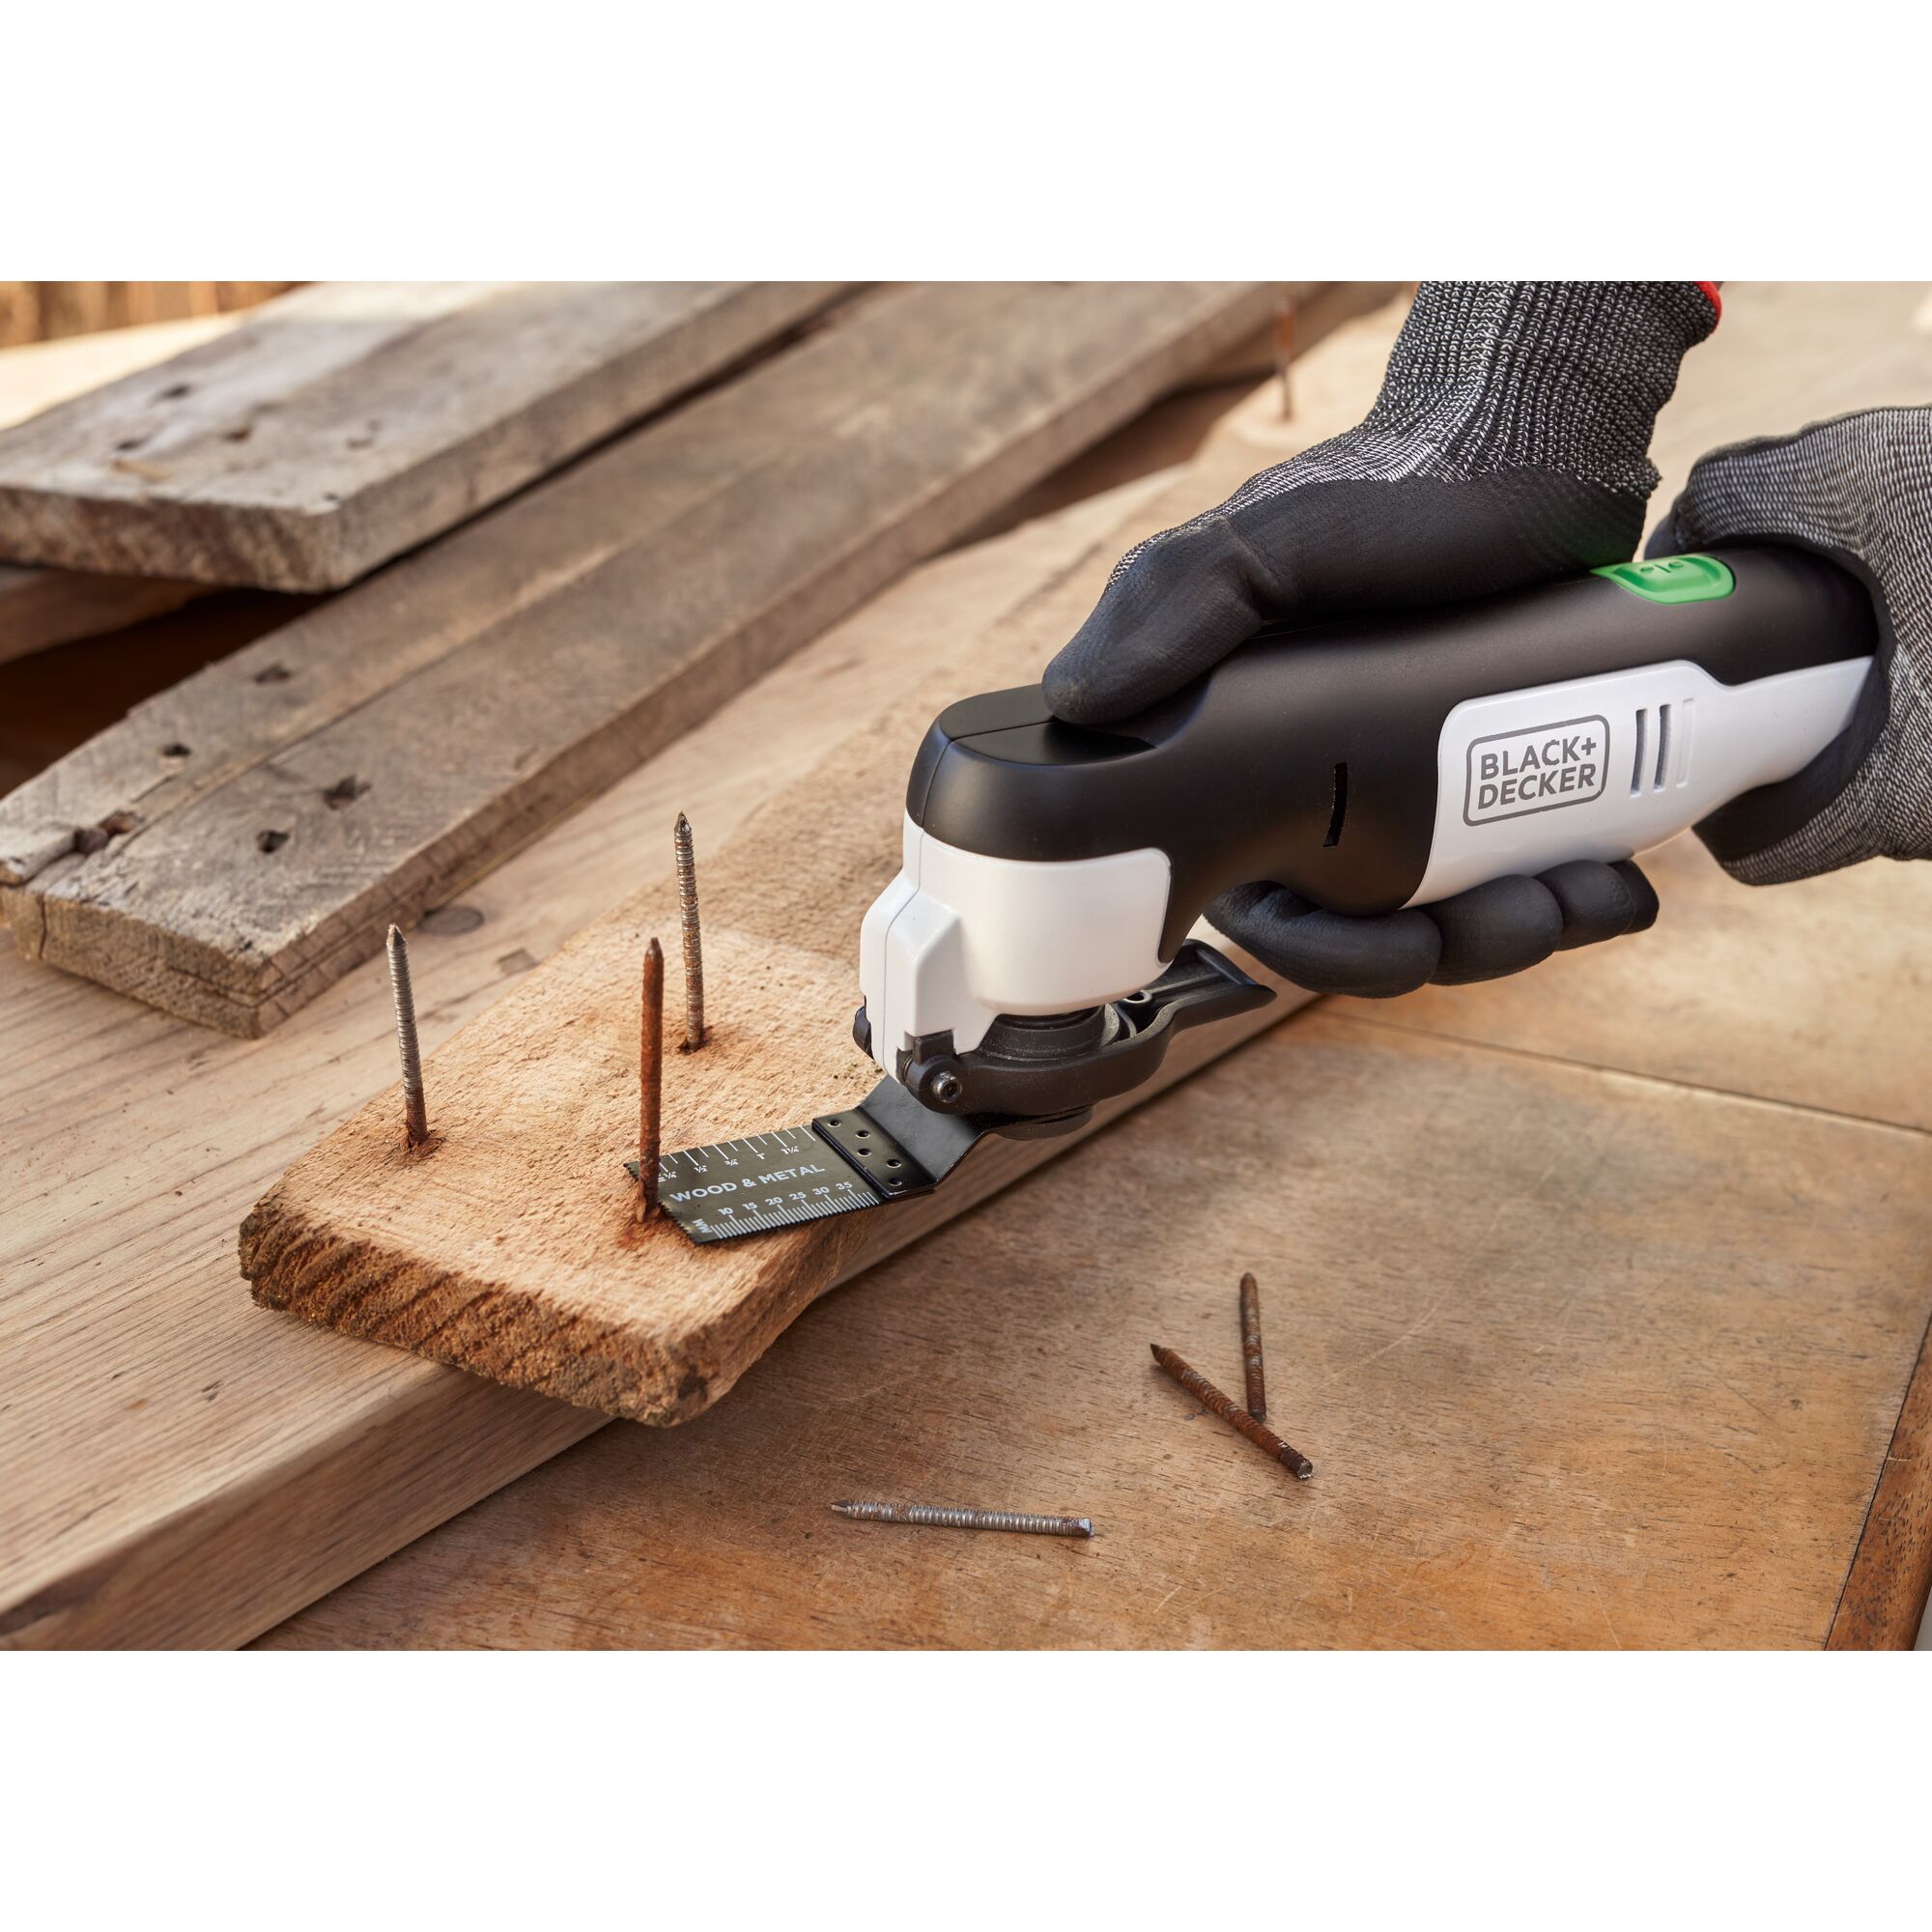 reviva 12V MAX* Oscillating Multi-Tool cutting rusty nails from a wood board.